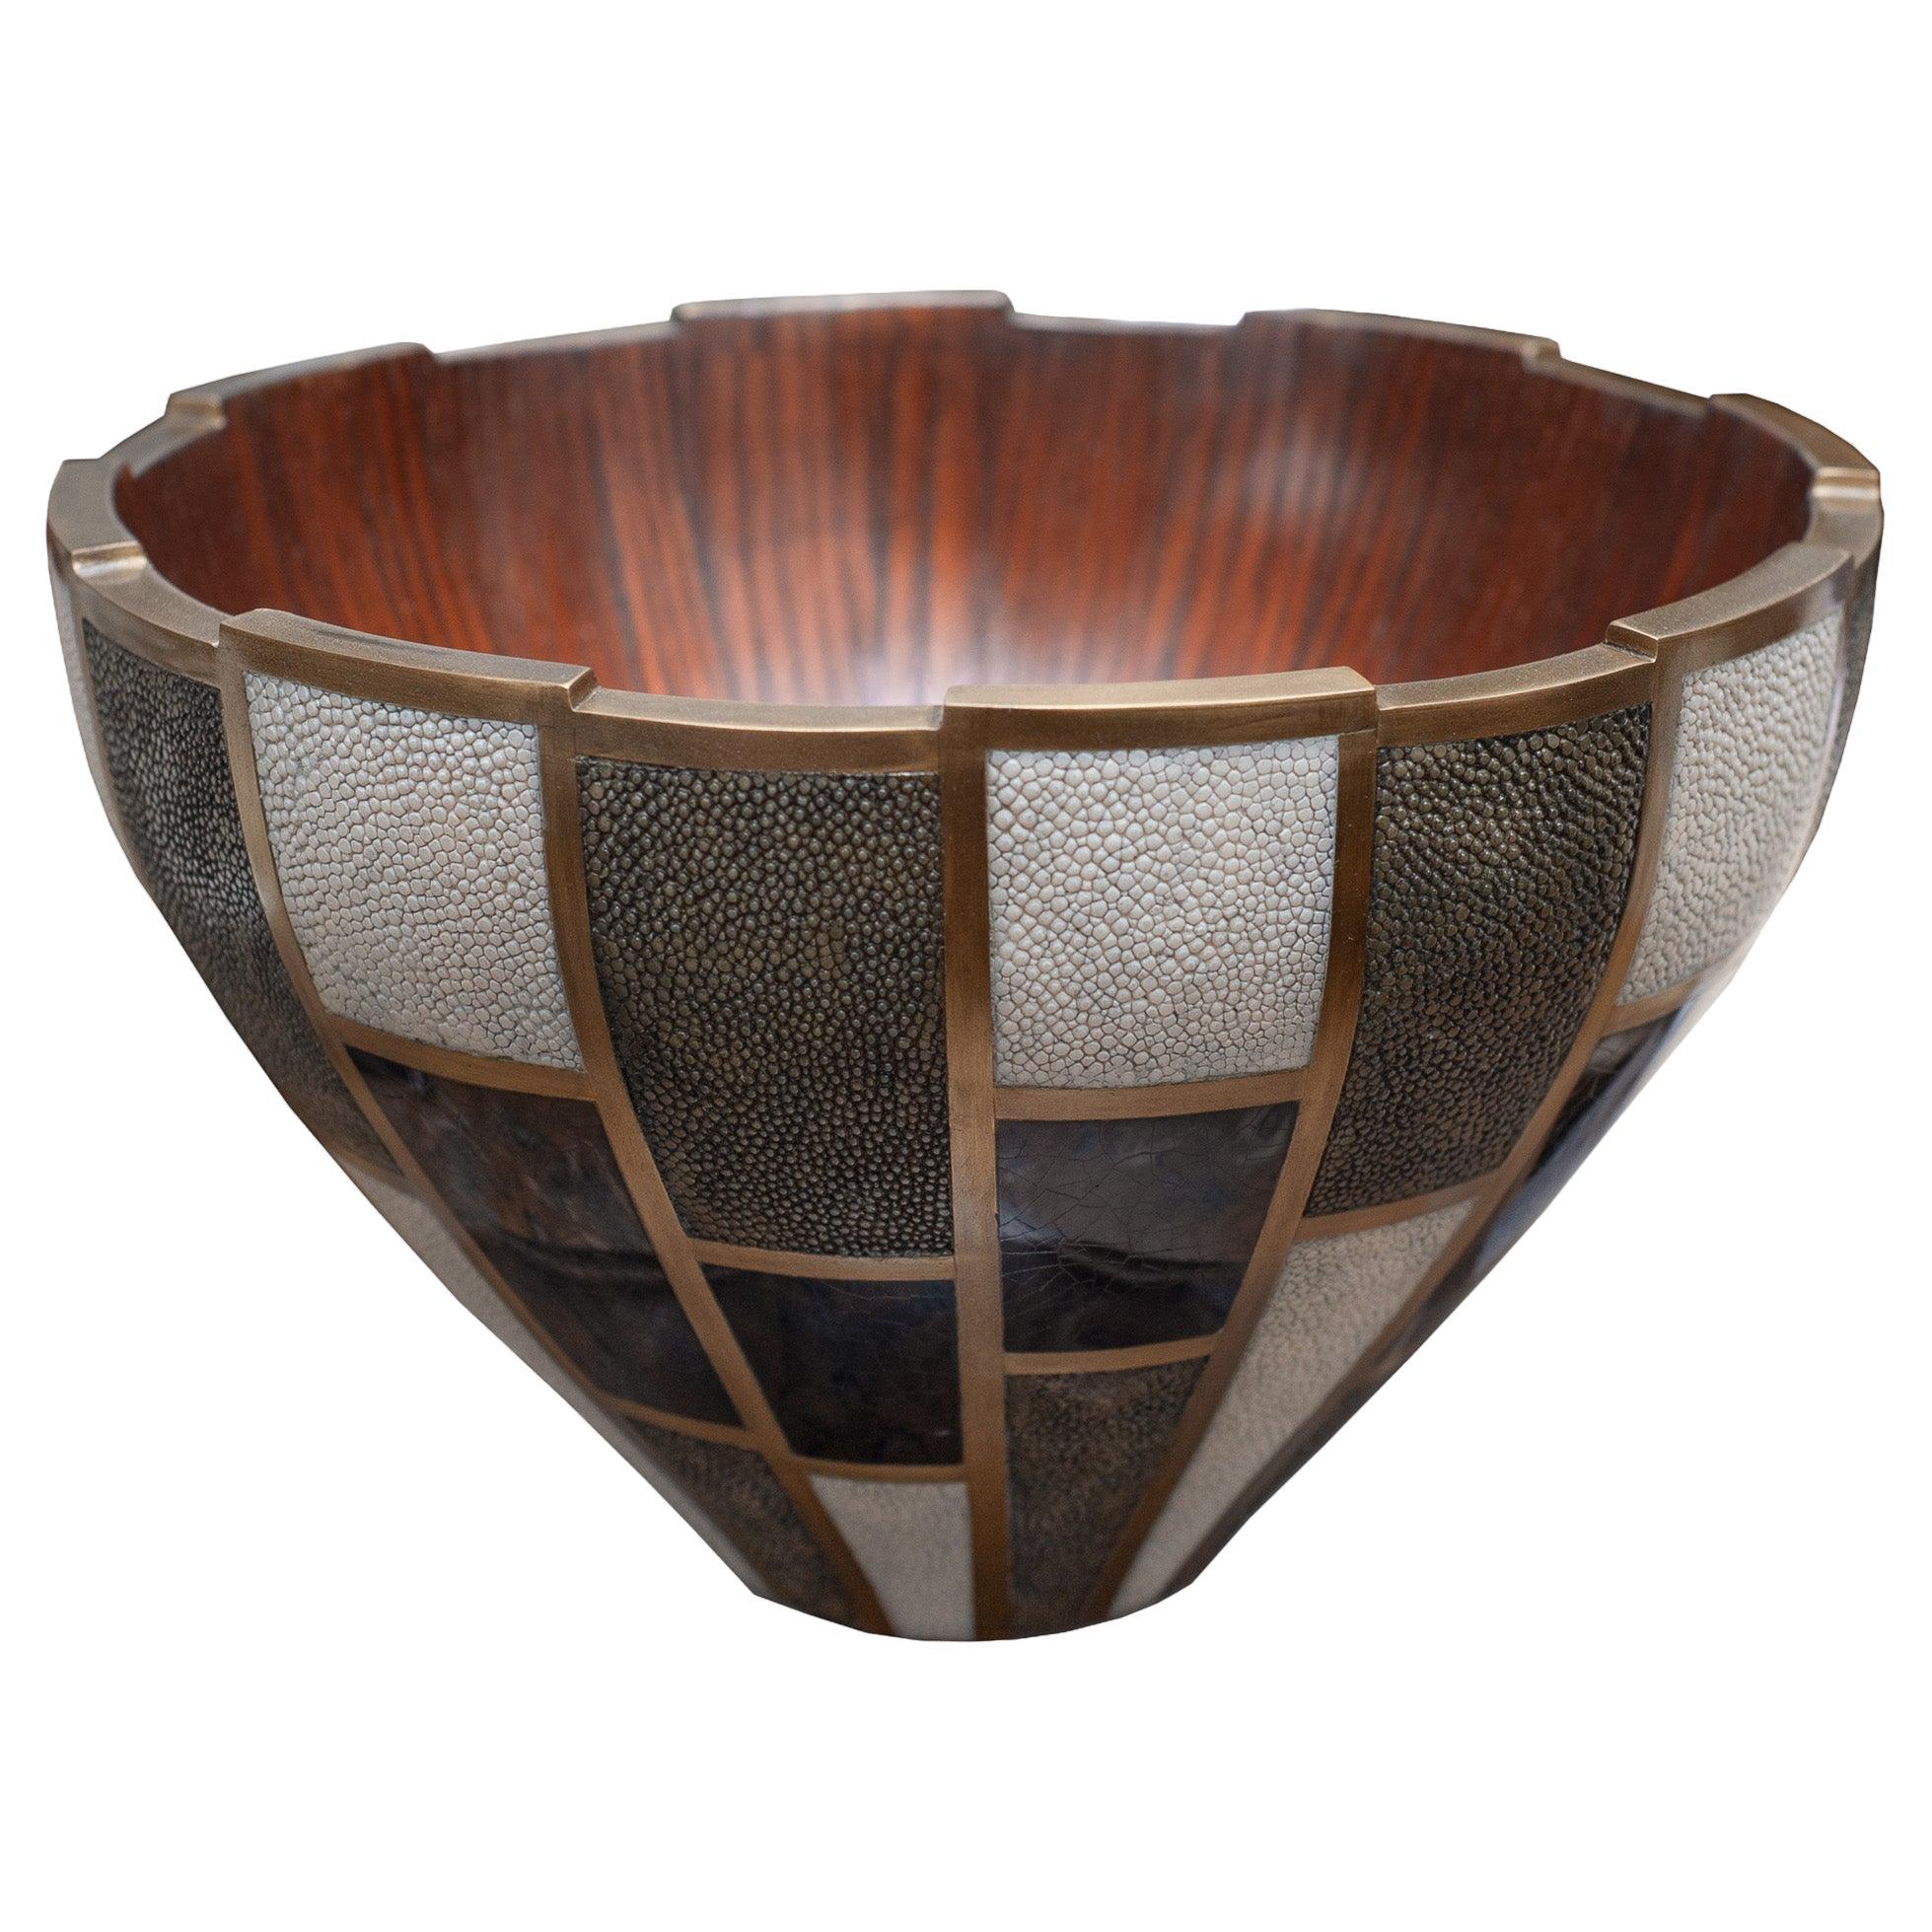 Contemporary R & Y Augousti Bowl with Inlaid Shagreen, Penshell and Brass For Sale